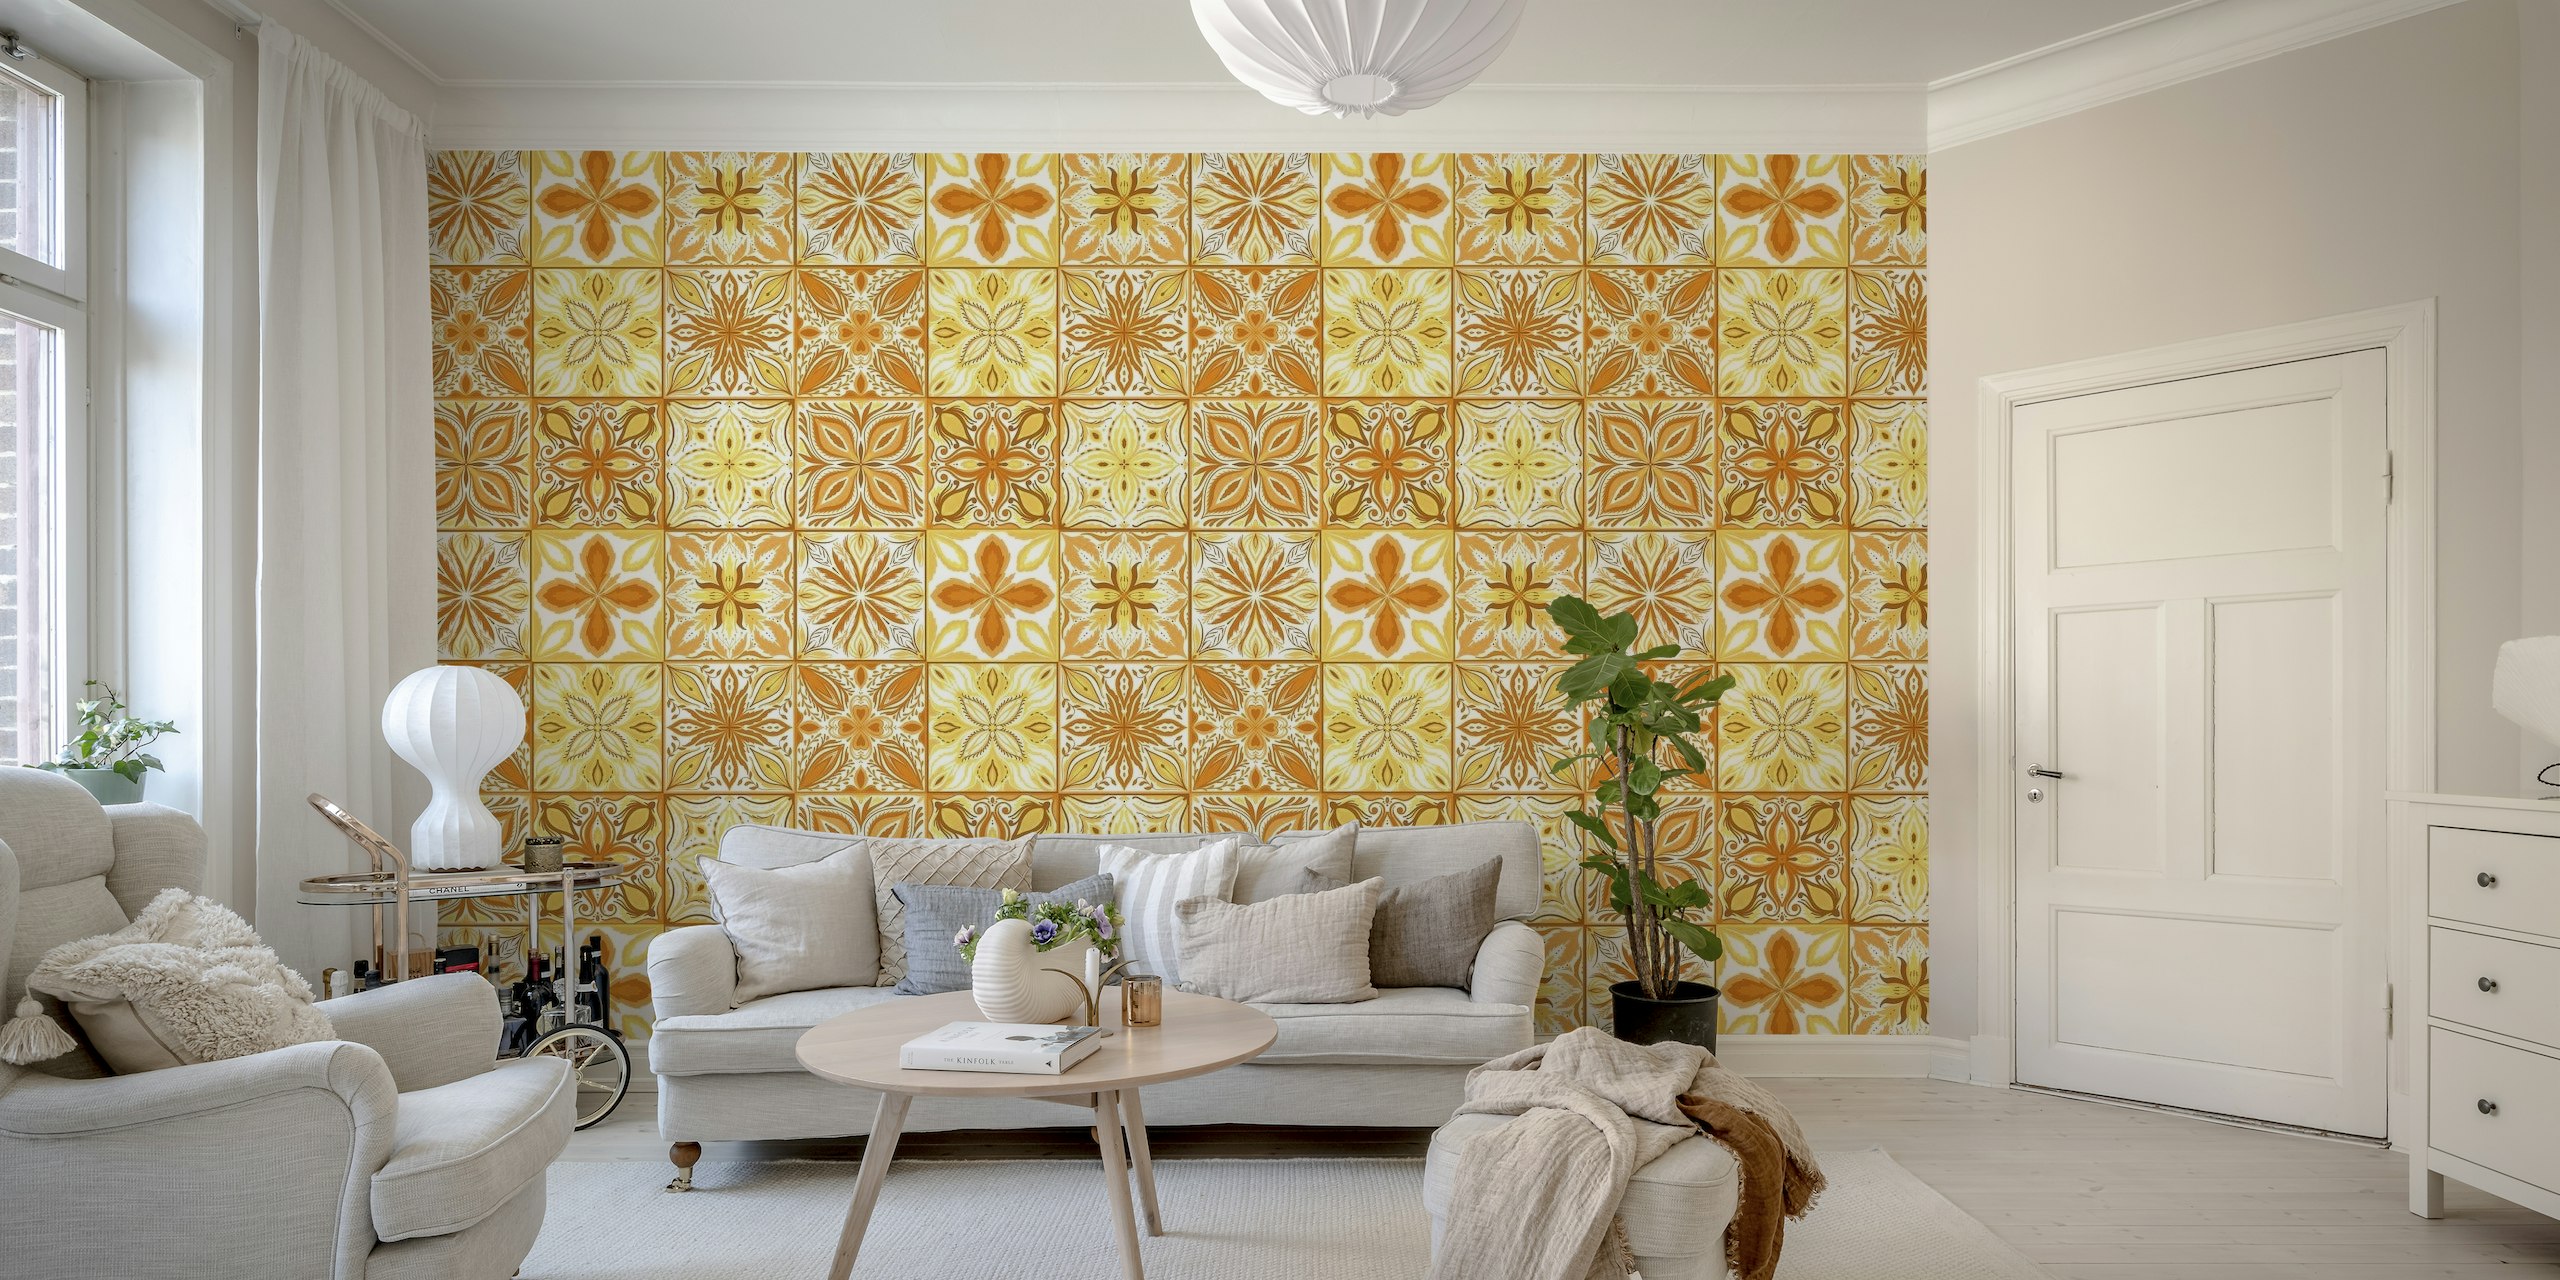 Ornate tiles in orange and yellow tapety